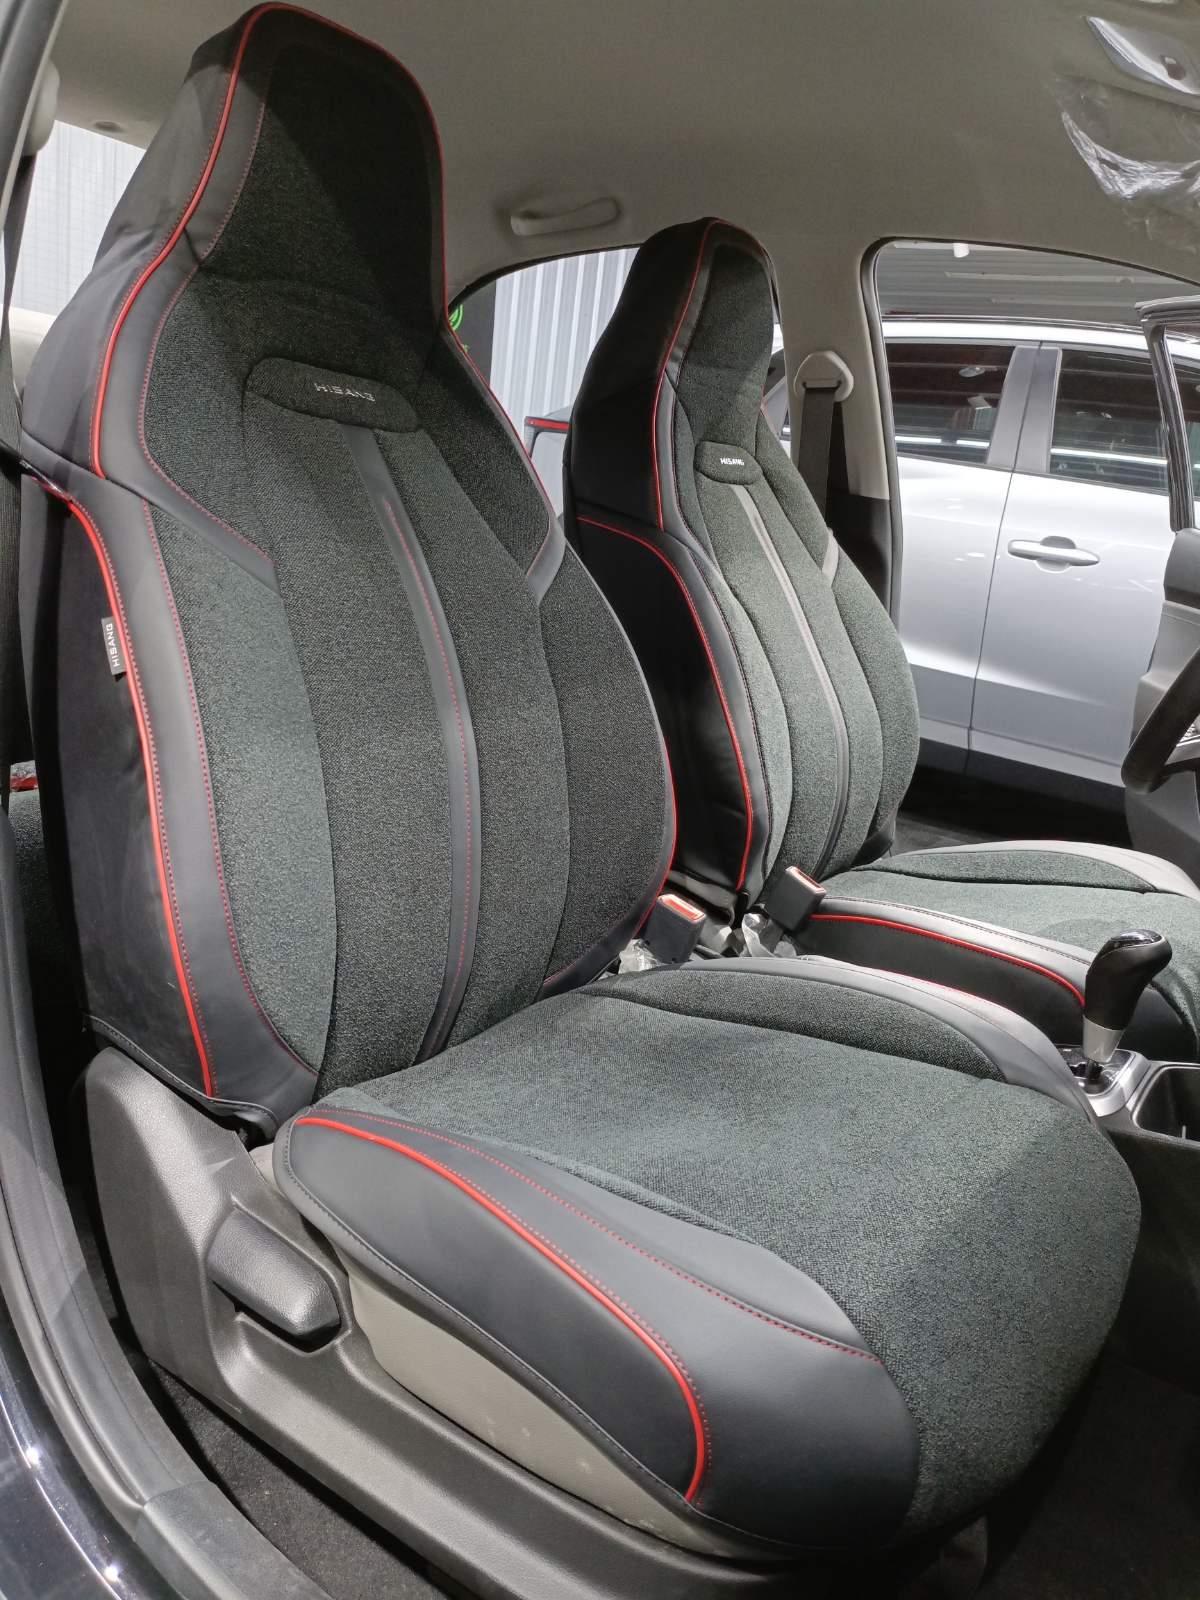 RAYMAX LUXURY SEAT COVER (H-23QD-11) (1) SET (BLACK + RED)